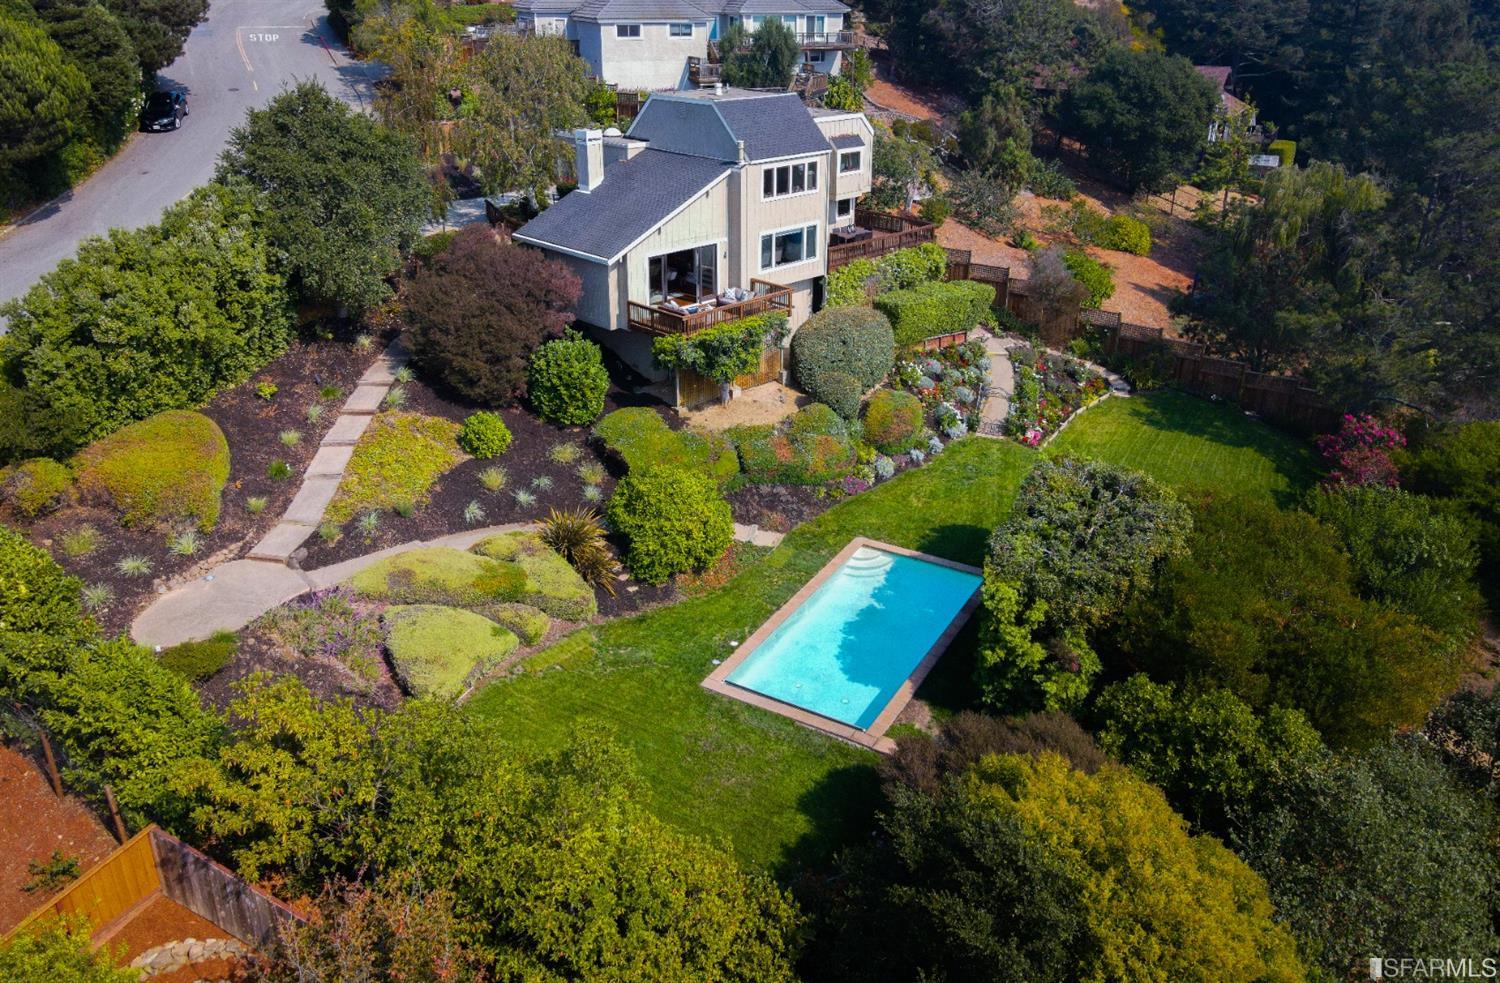 an aerial view of residential house with swimming pool and outdoor space